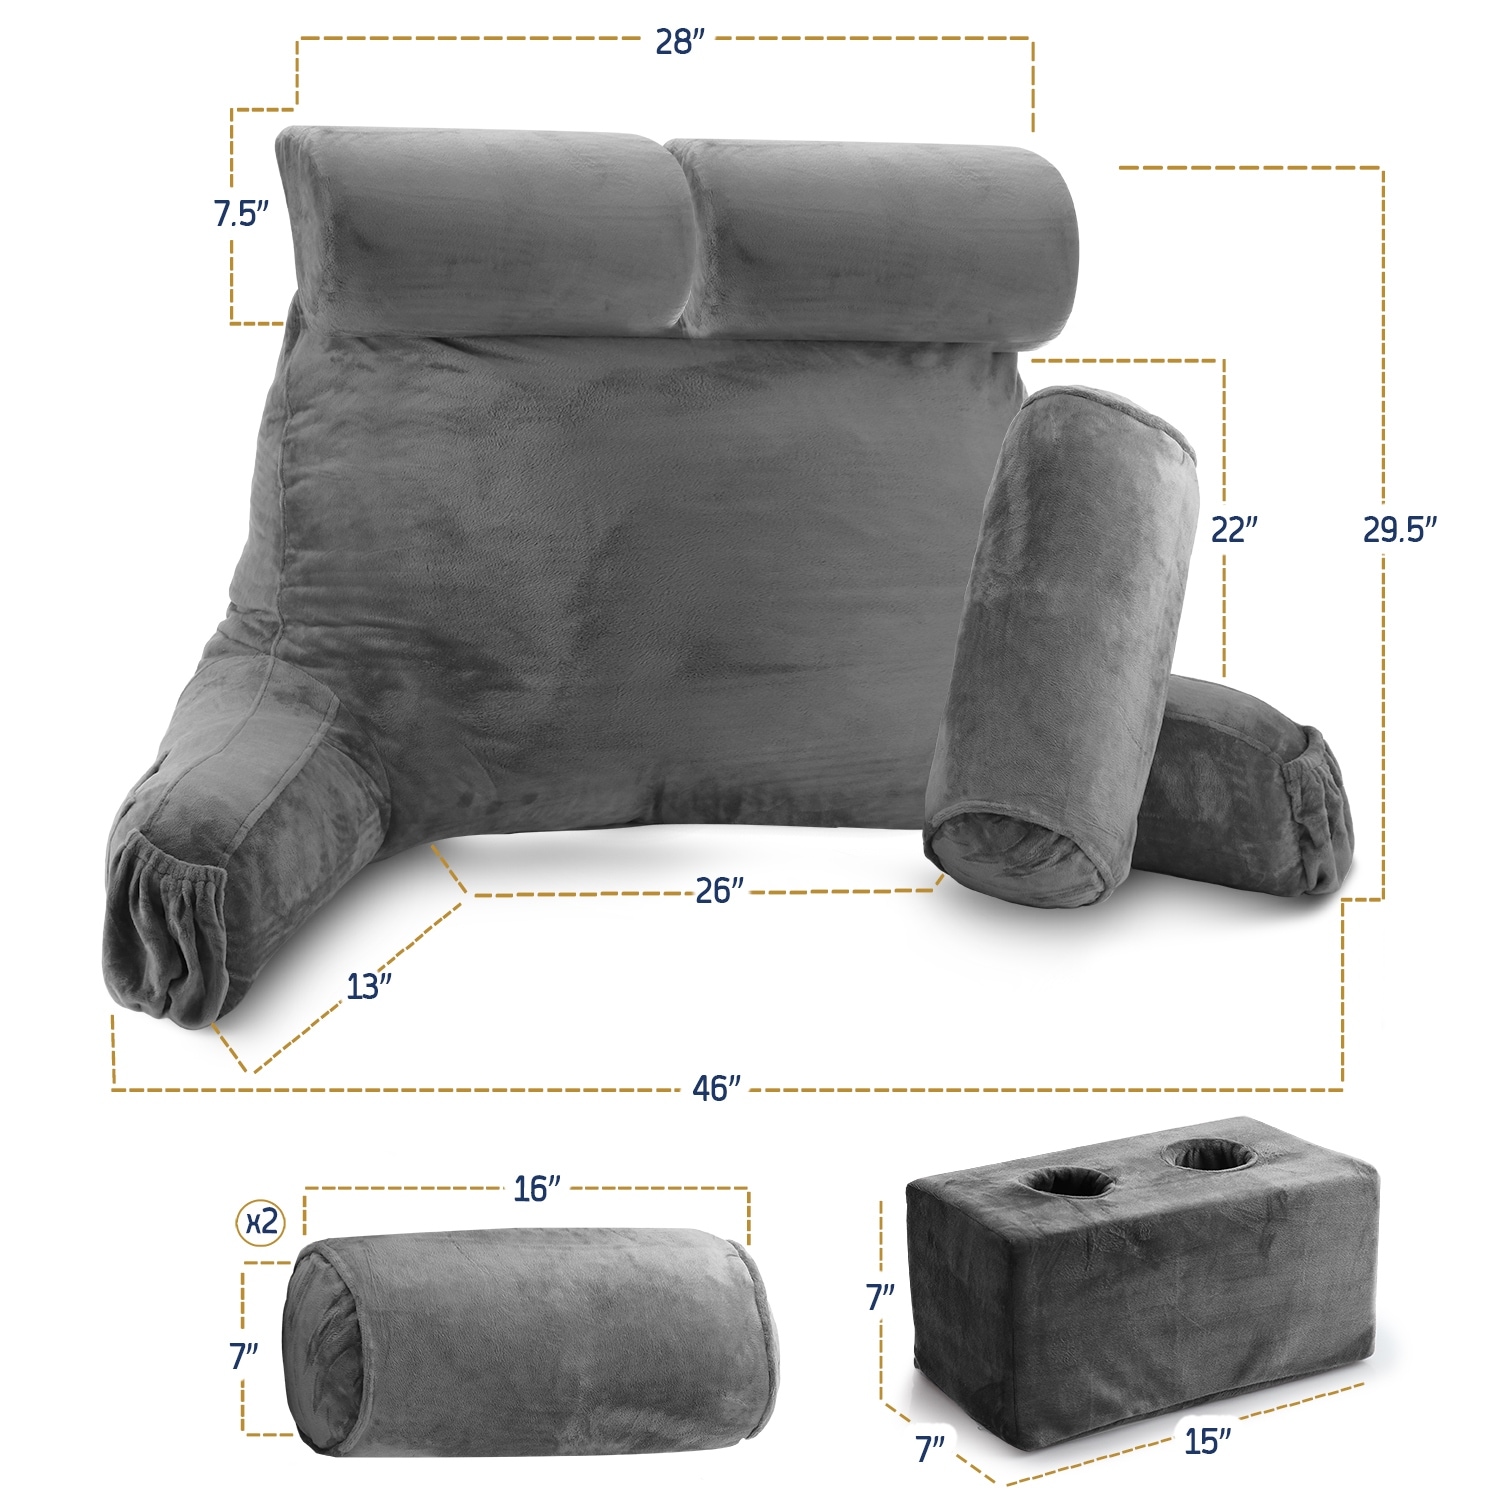 https://ak1.ostkcdn.com/images/products/is/images/direct/ee3e8bacb148038cbb6fdb810d072fa1830a4550/Nestl-Double-Reading-Pillow---Shredded-Memory-Foam-Backrest-Pillow---Includes-2-Neck-Rolls-%26-2-Lumbar-Back-Support-Pillows.jpg